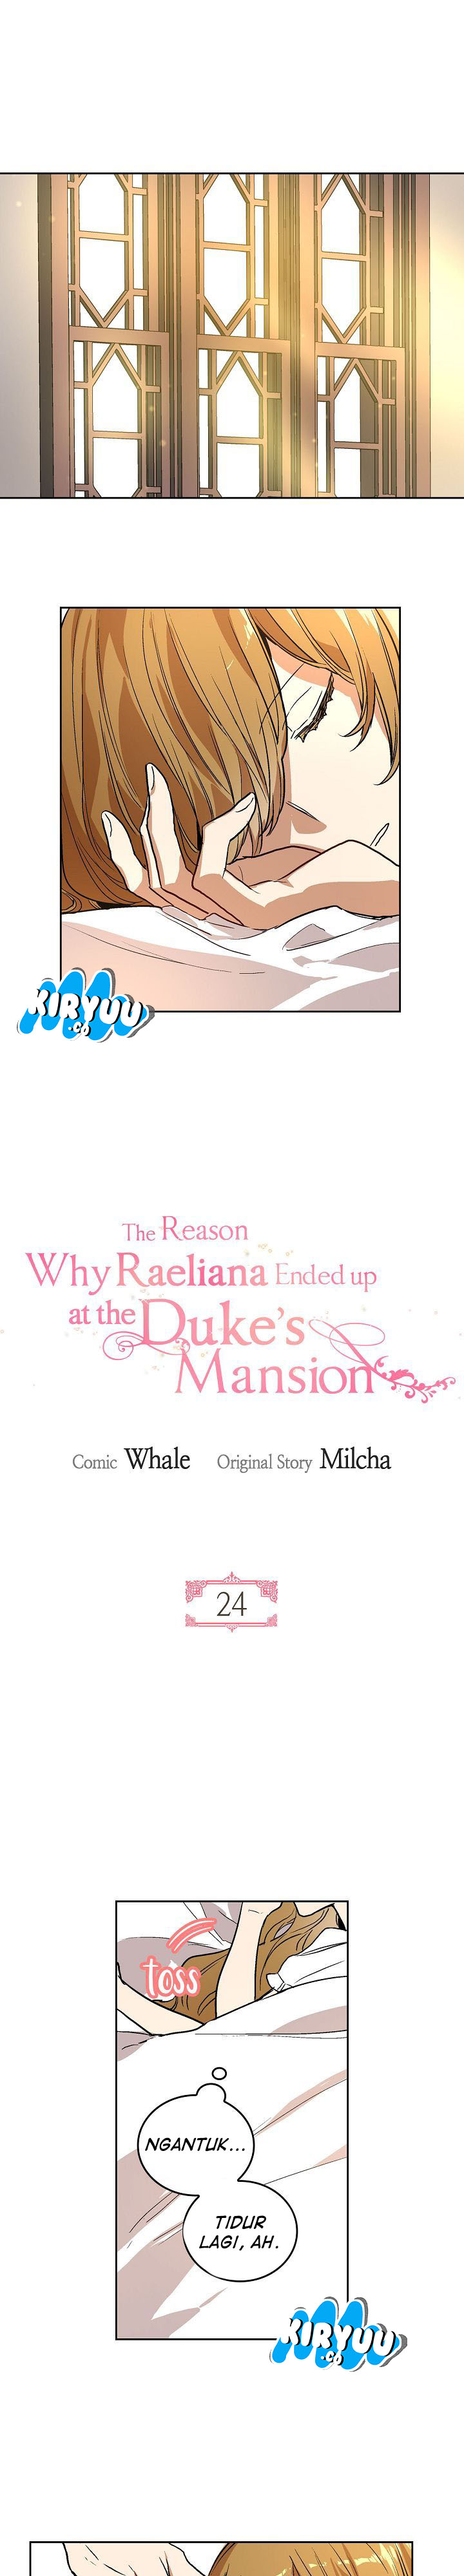 The Reason Why Raeliana Ended up at the Duke’s Mansion Chapter 24